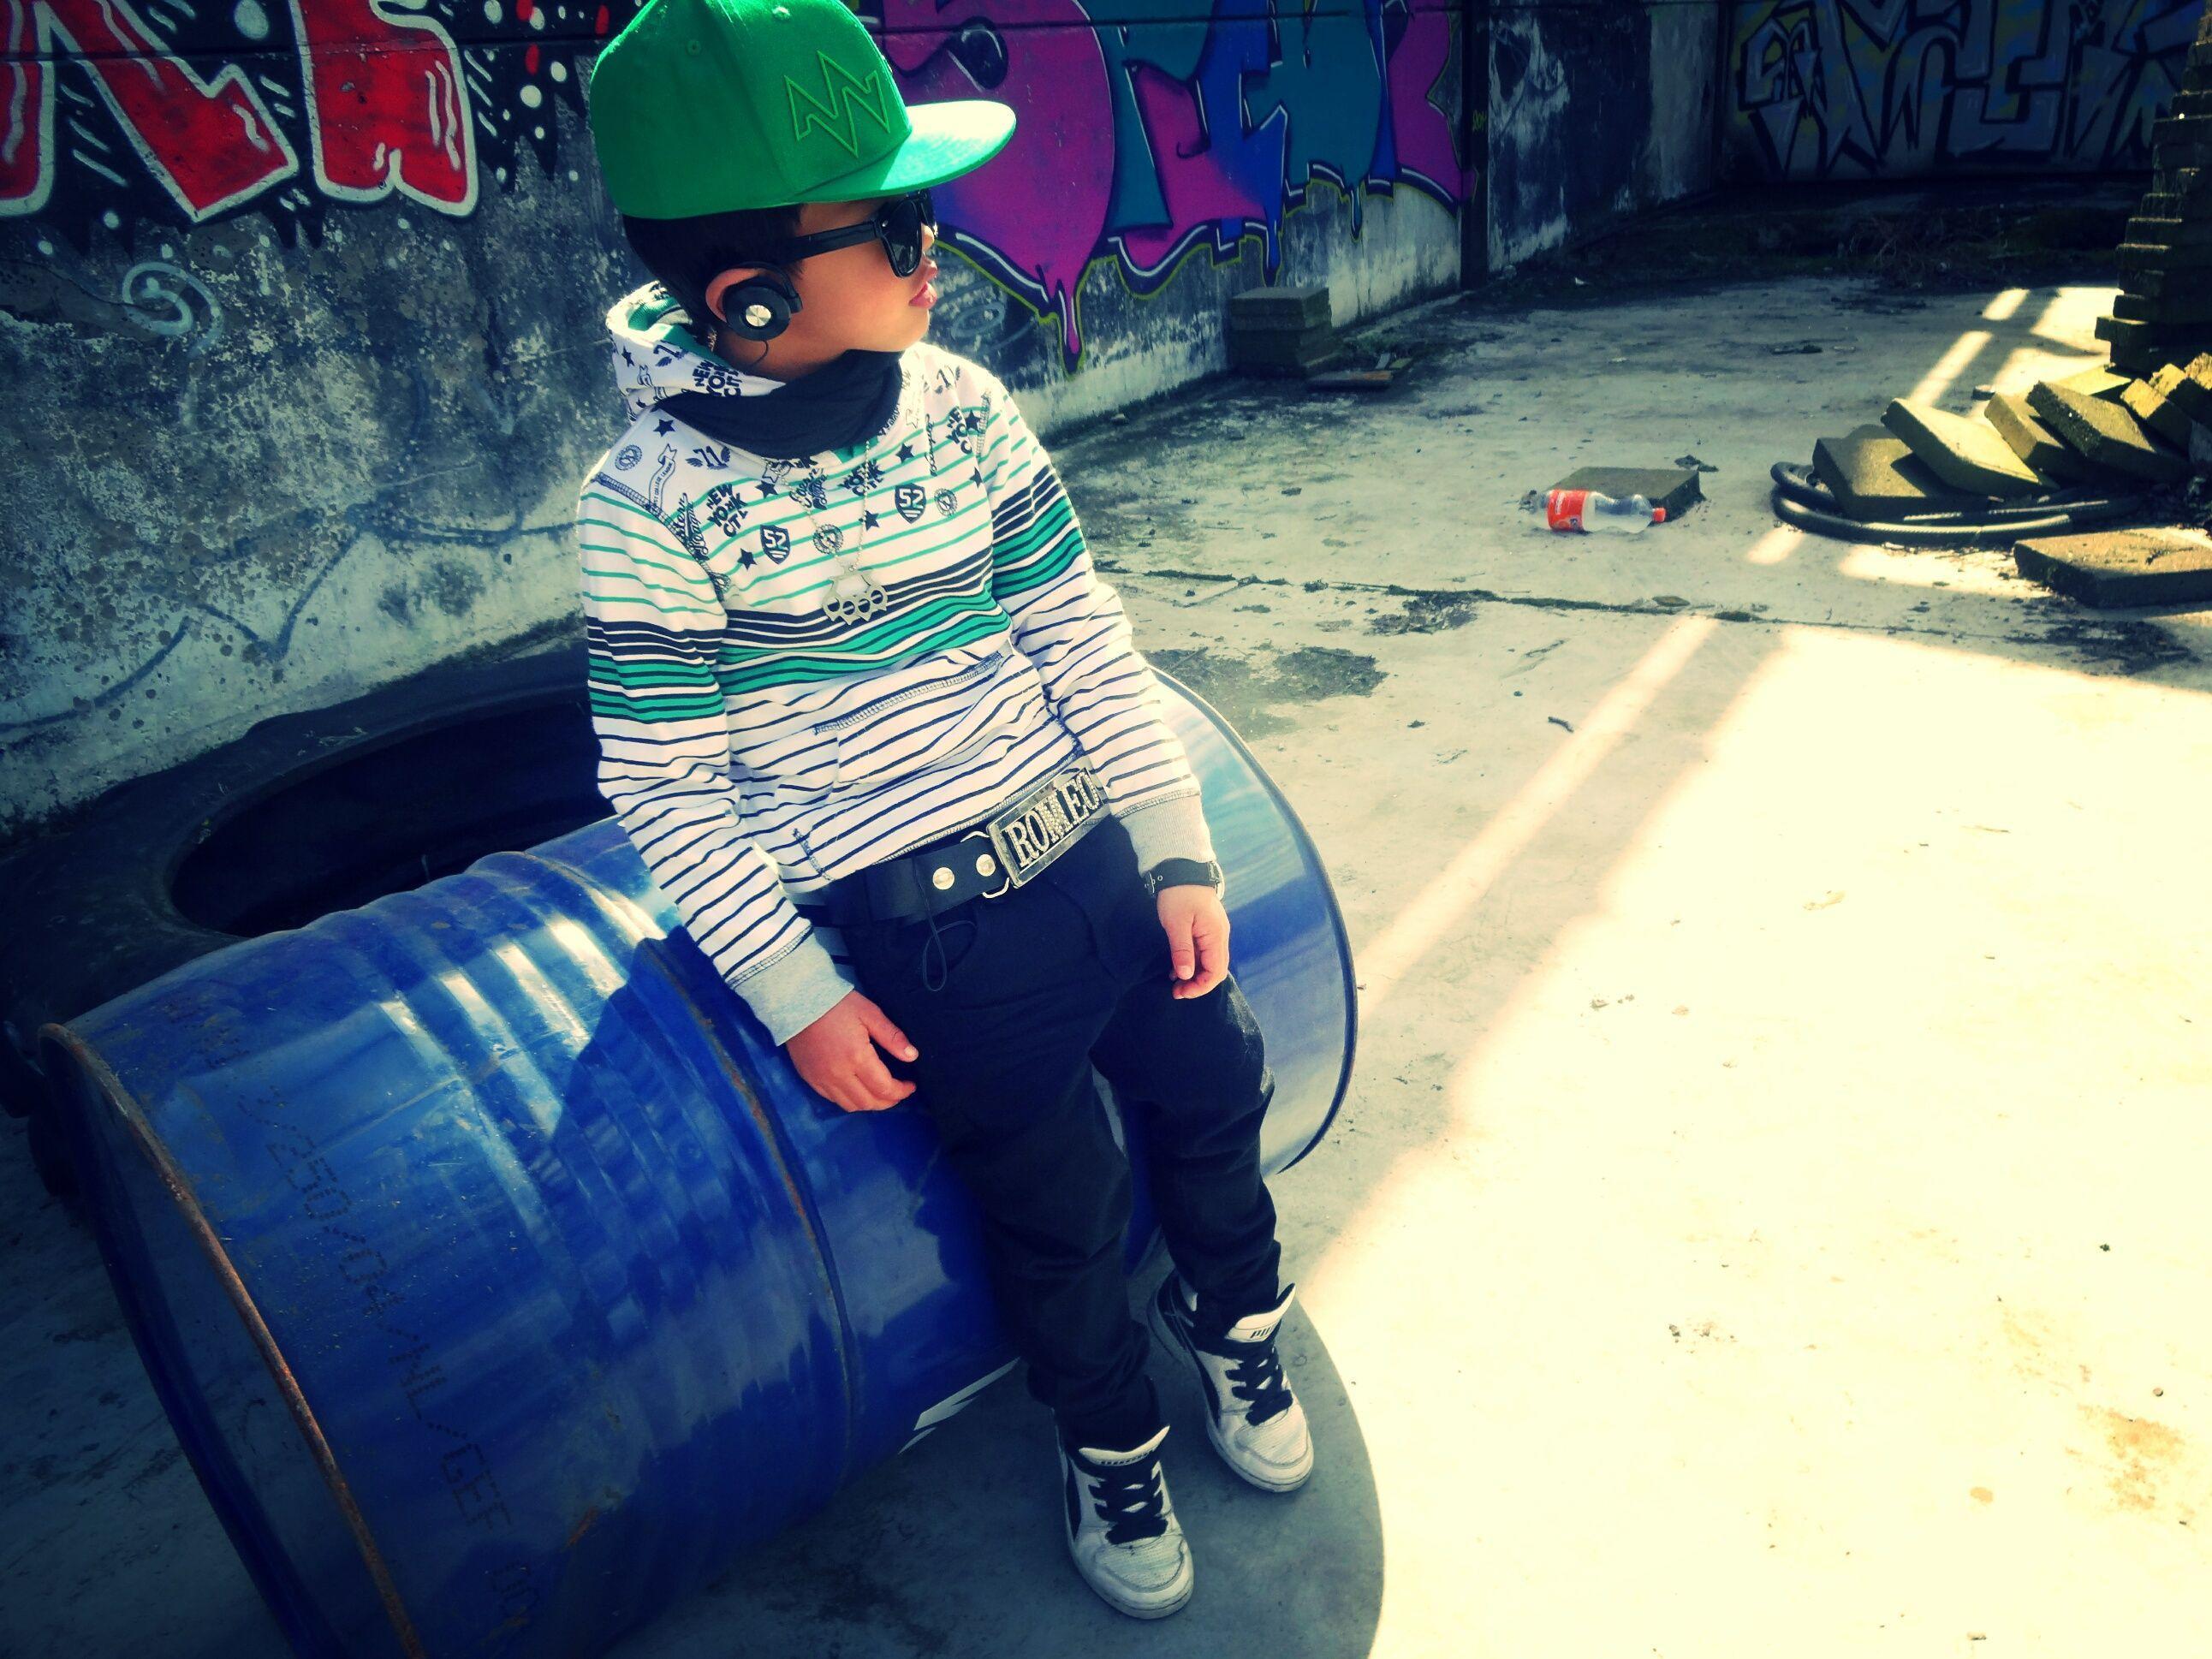 A boy in a green cap and barrel, swag wallpaper and image